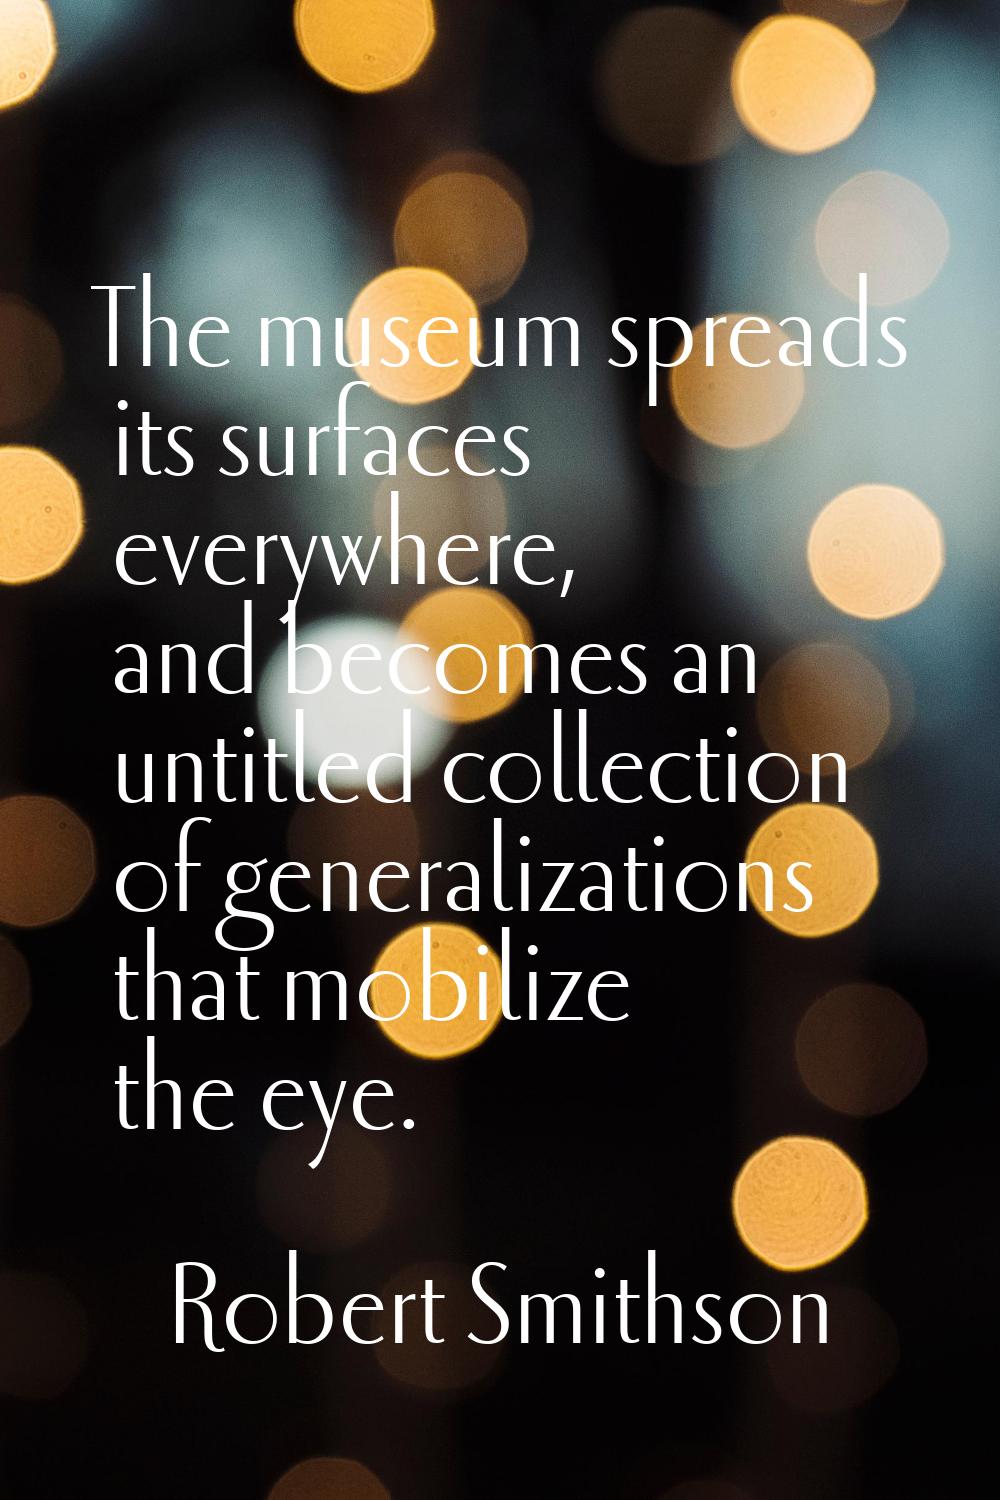 The museum spreads its surfaces everywhere, and becomes an untitled collection of generalizations t